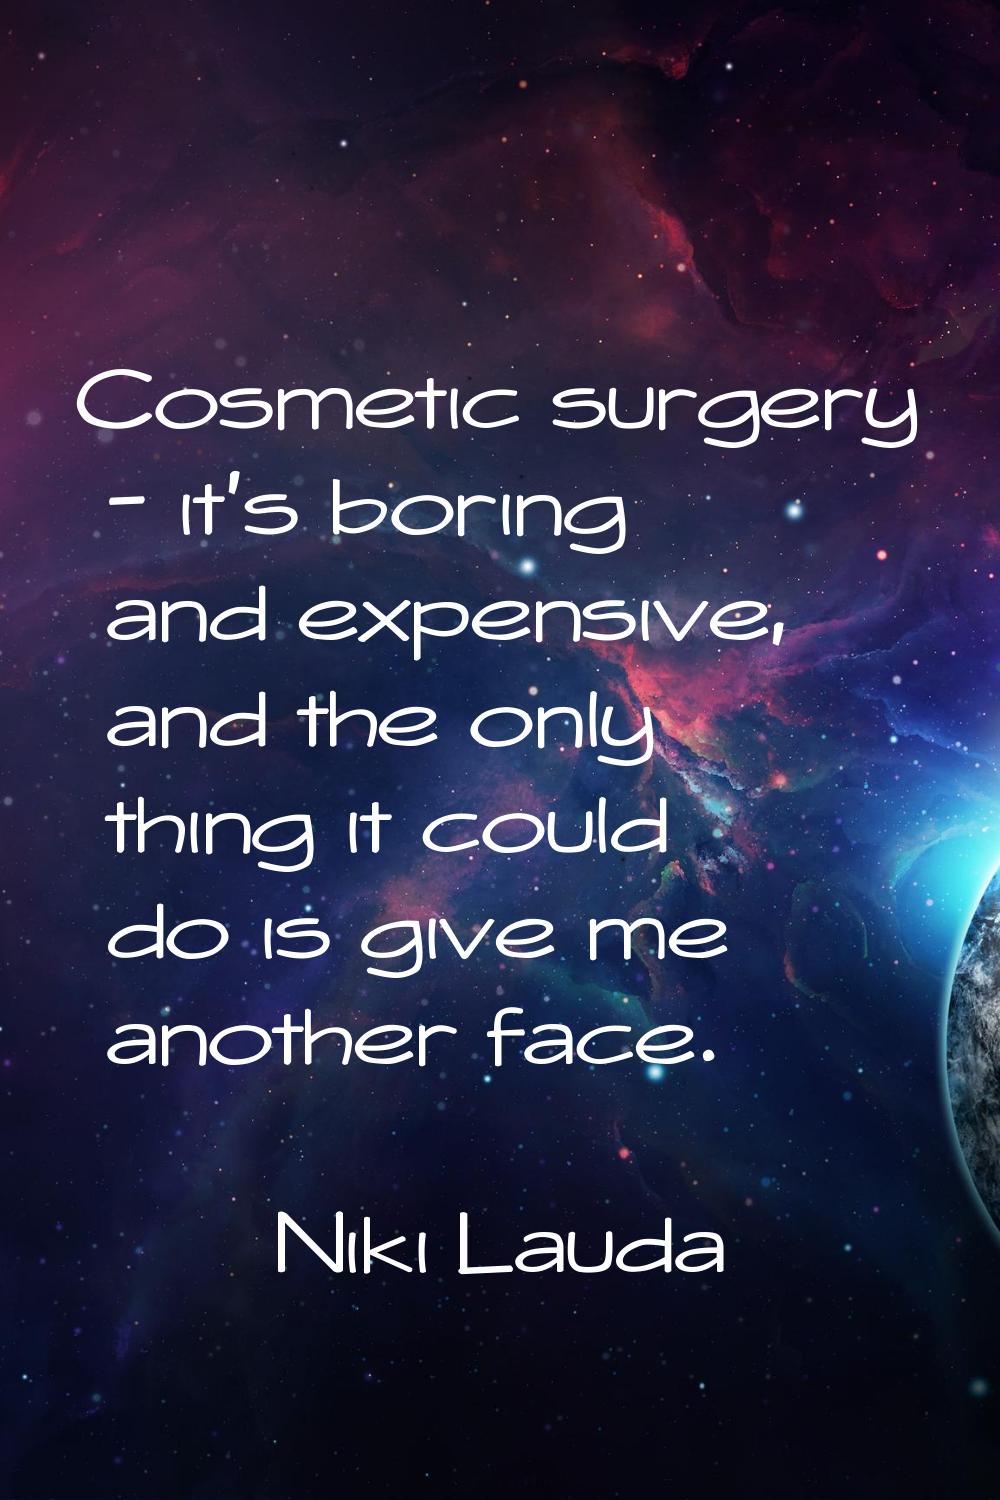 Cosmetic surgery - it's boring and expensive, and the only thing it could do is give me another fac